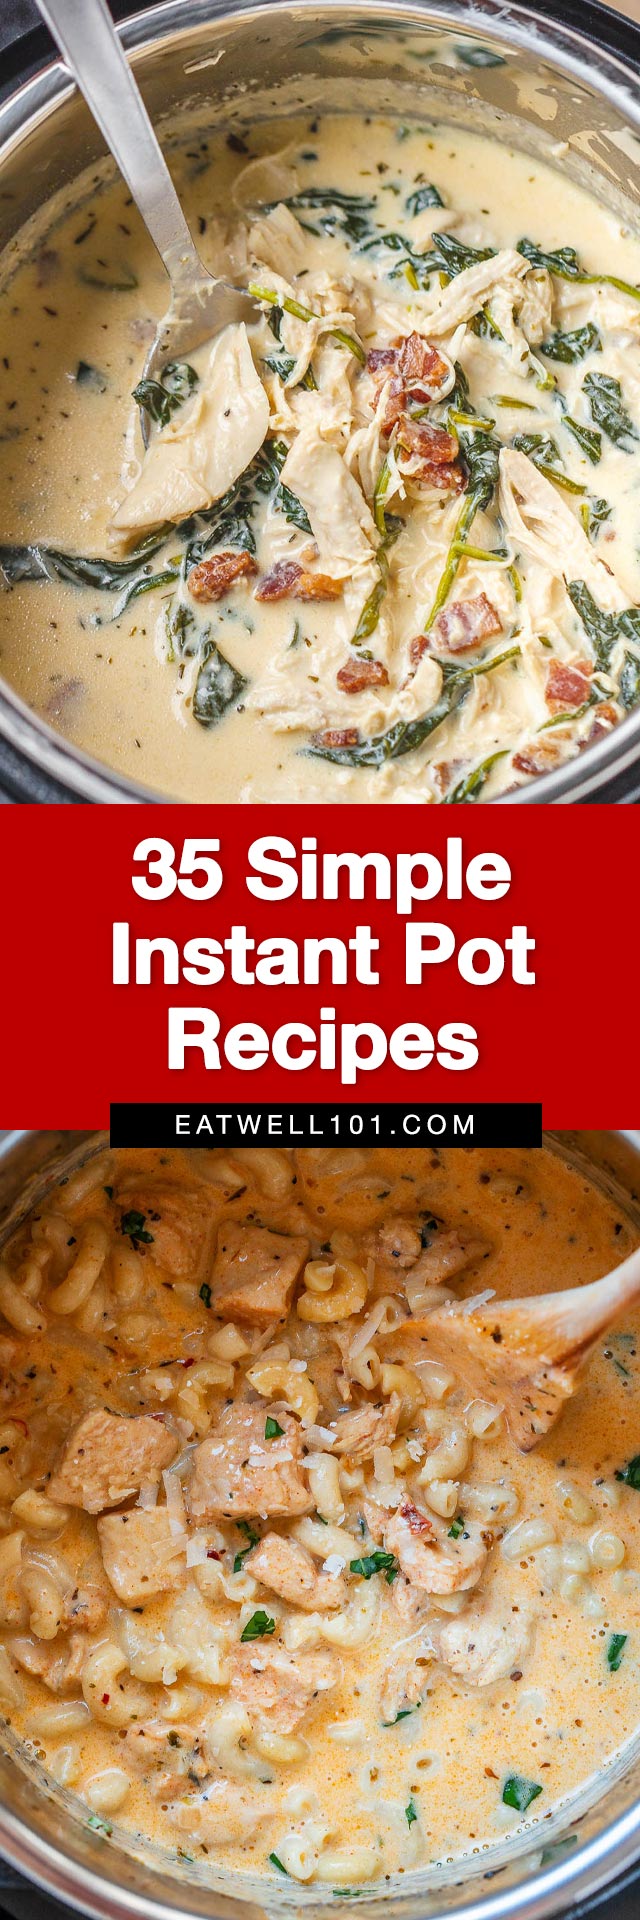 Simple Instant Pot Recipes - #instantpot #recipes #eatwell101 - Our easiest Instant Pot recipes to help you get a quick dinner on the table. Check out these Instant Pot recipes for time-saving pasta, soup, chicken, beef, and more! 